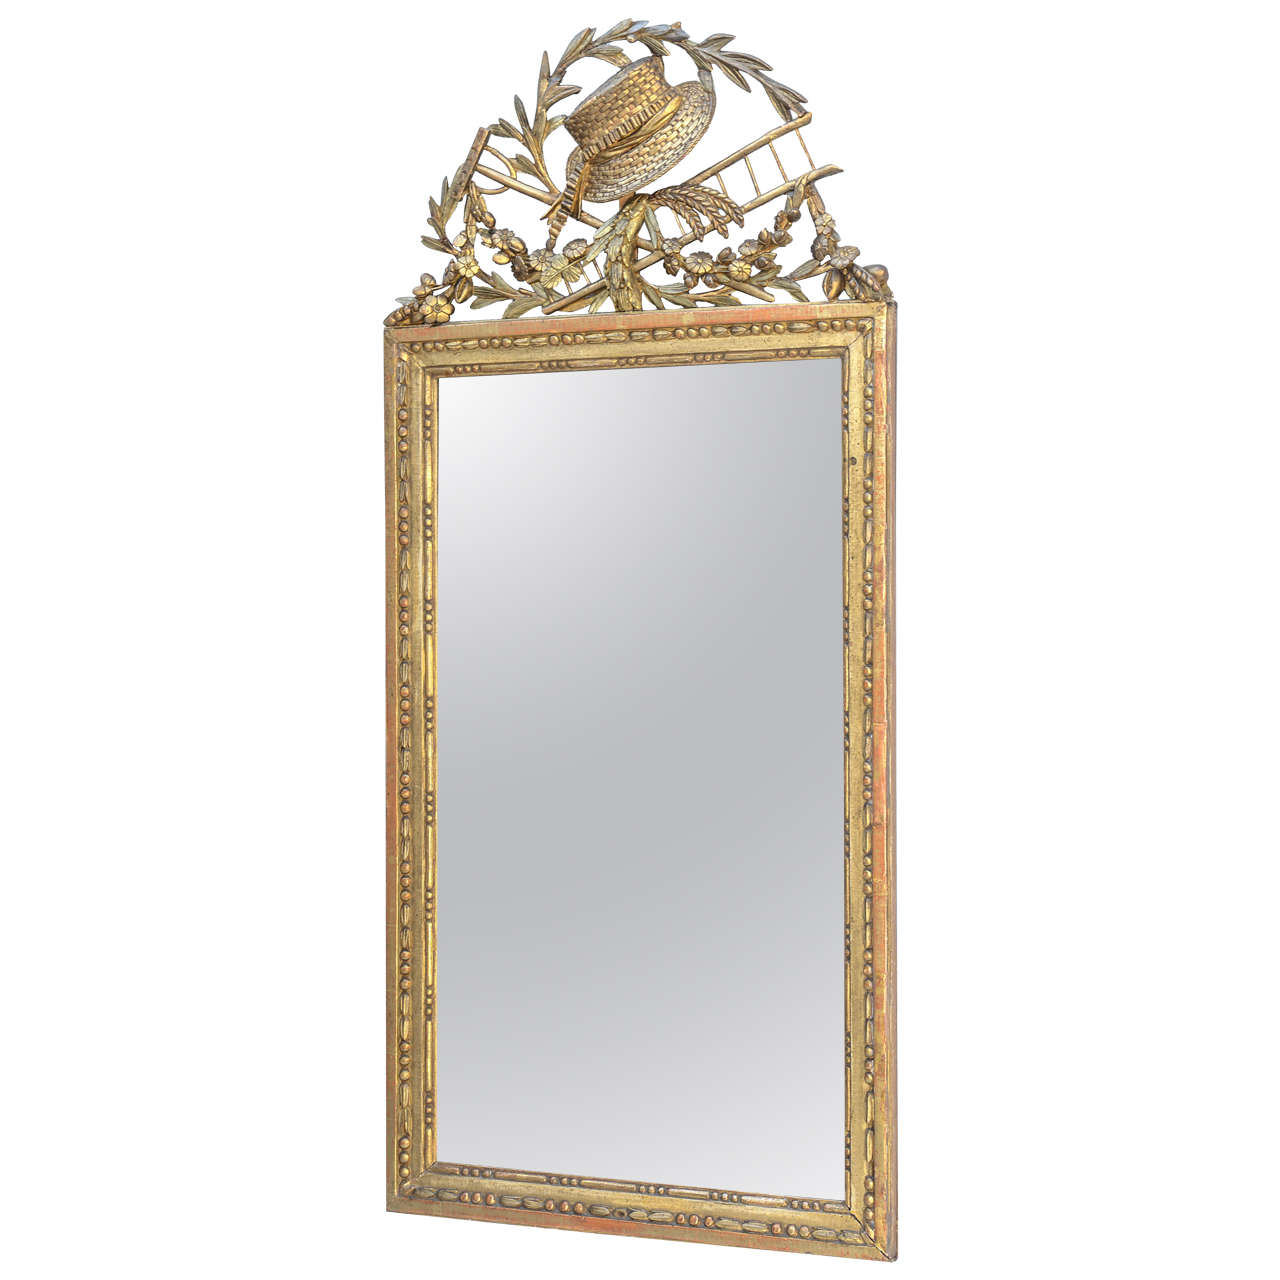 Fantastic 19th Century French Giltwood Mirror with Whimiscal Carved Pediment